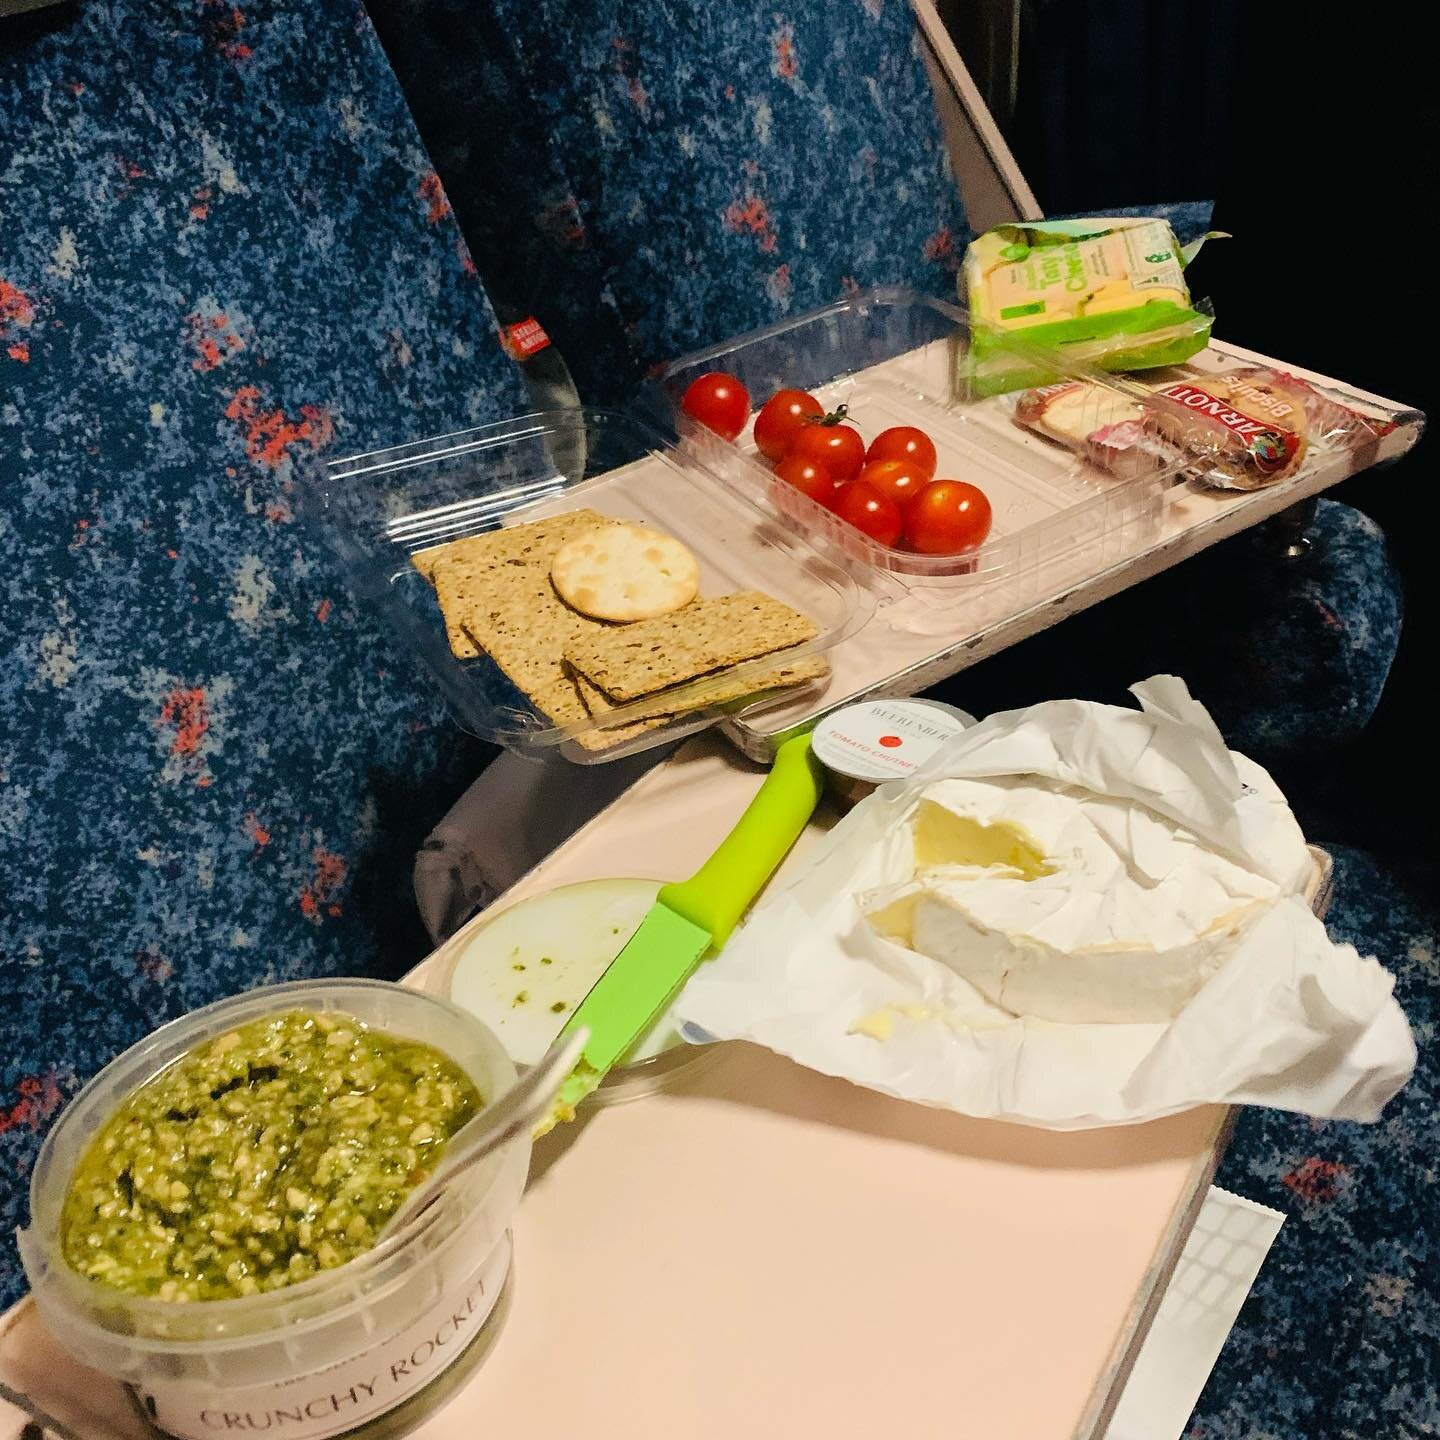 Because I&rsquo;m a big fan of snack pack provisions on the go I&rsquo;m this kind of traveller.. this was the crackers and goodies for my recent overnight adventure train trip .. we ended up trialing the cabin delivered hot meals as well which were 